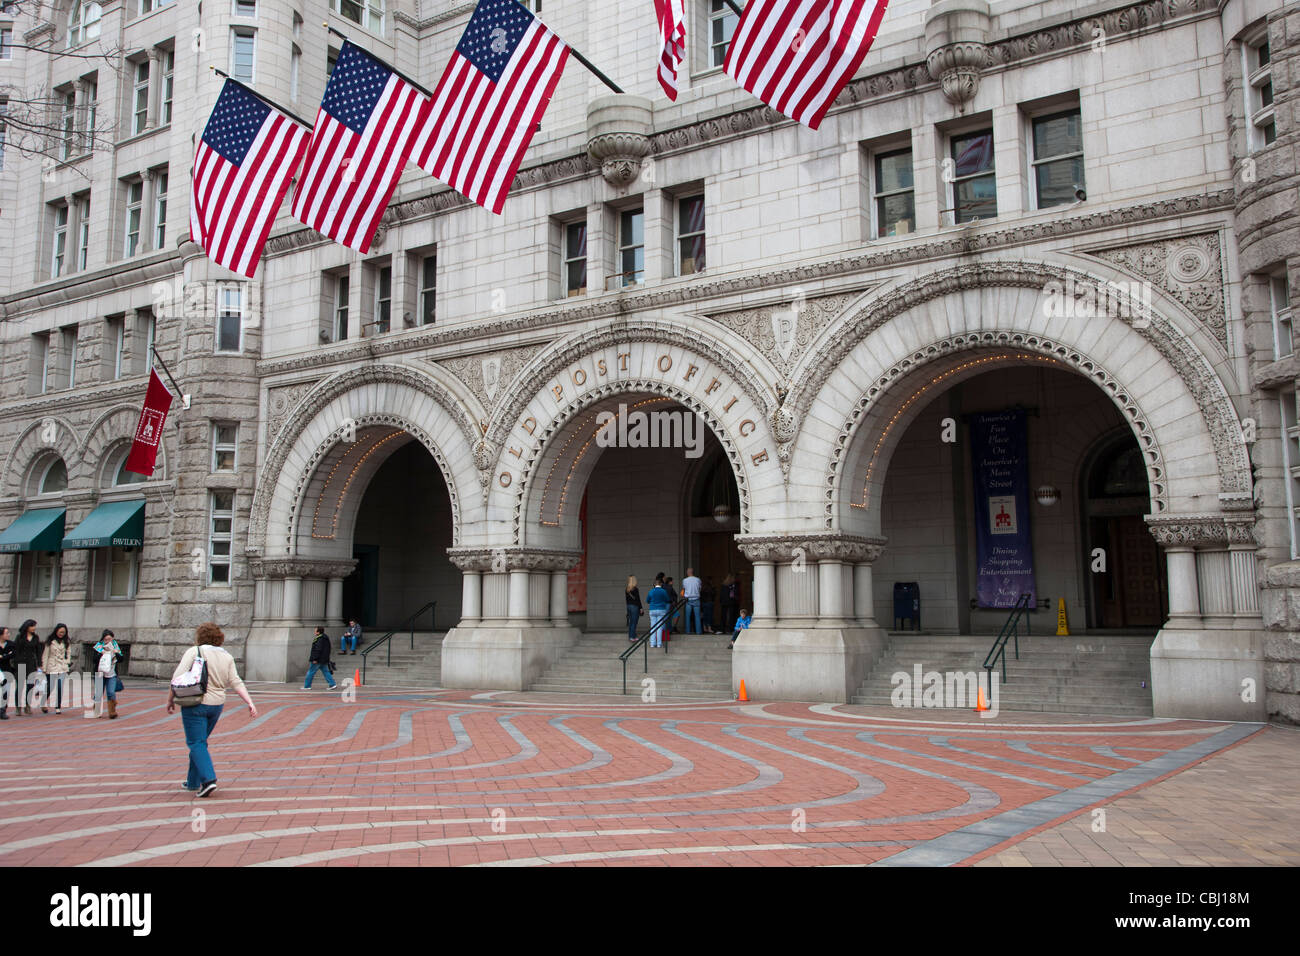 Entrance to the Old Post Office Pavillion in Washington, DC. Stock Photo